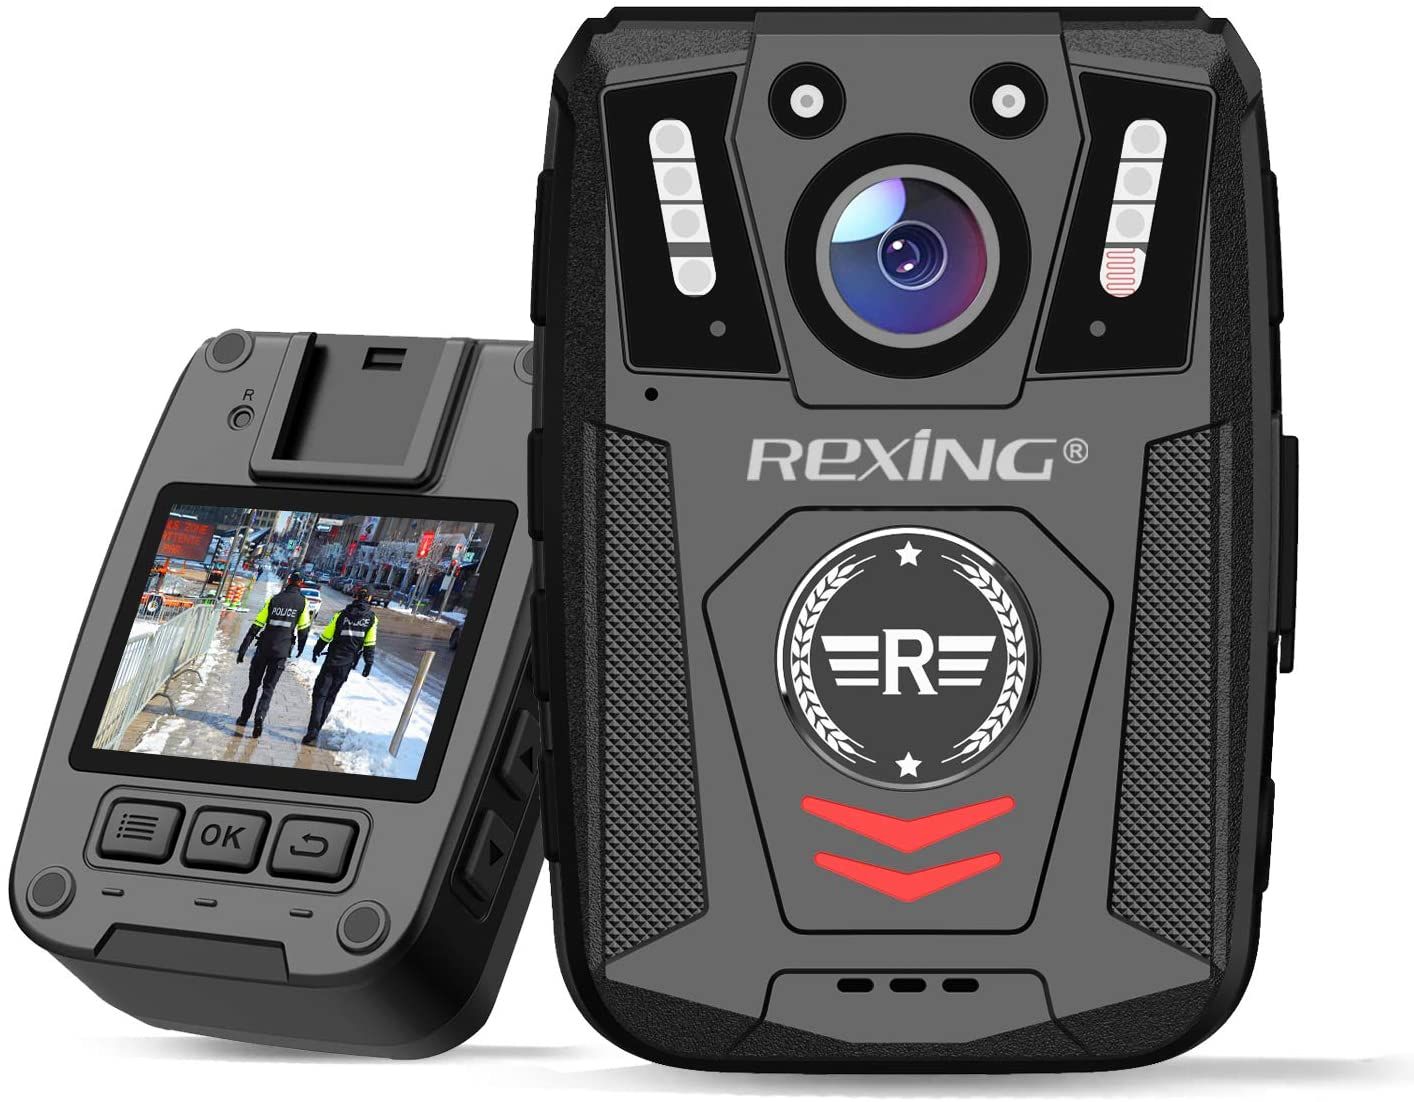 The 7 Best Body Cams for Live Streaming